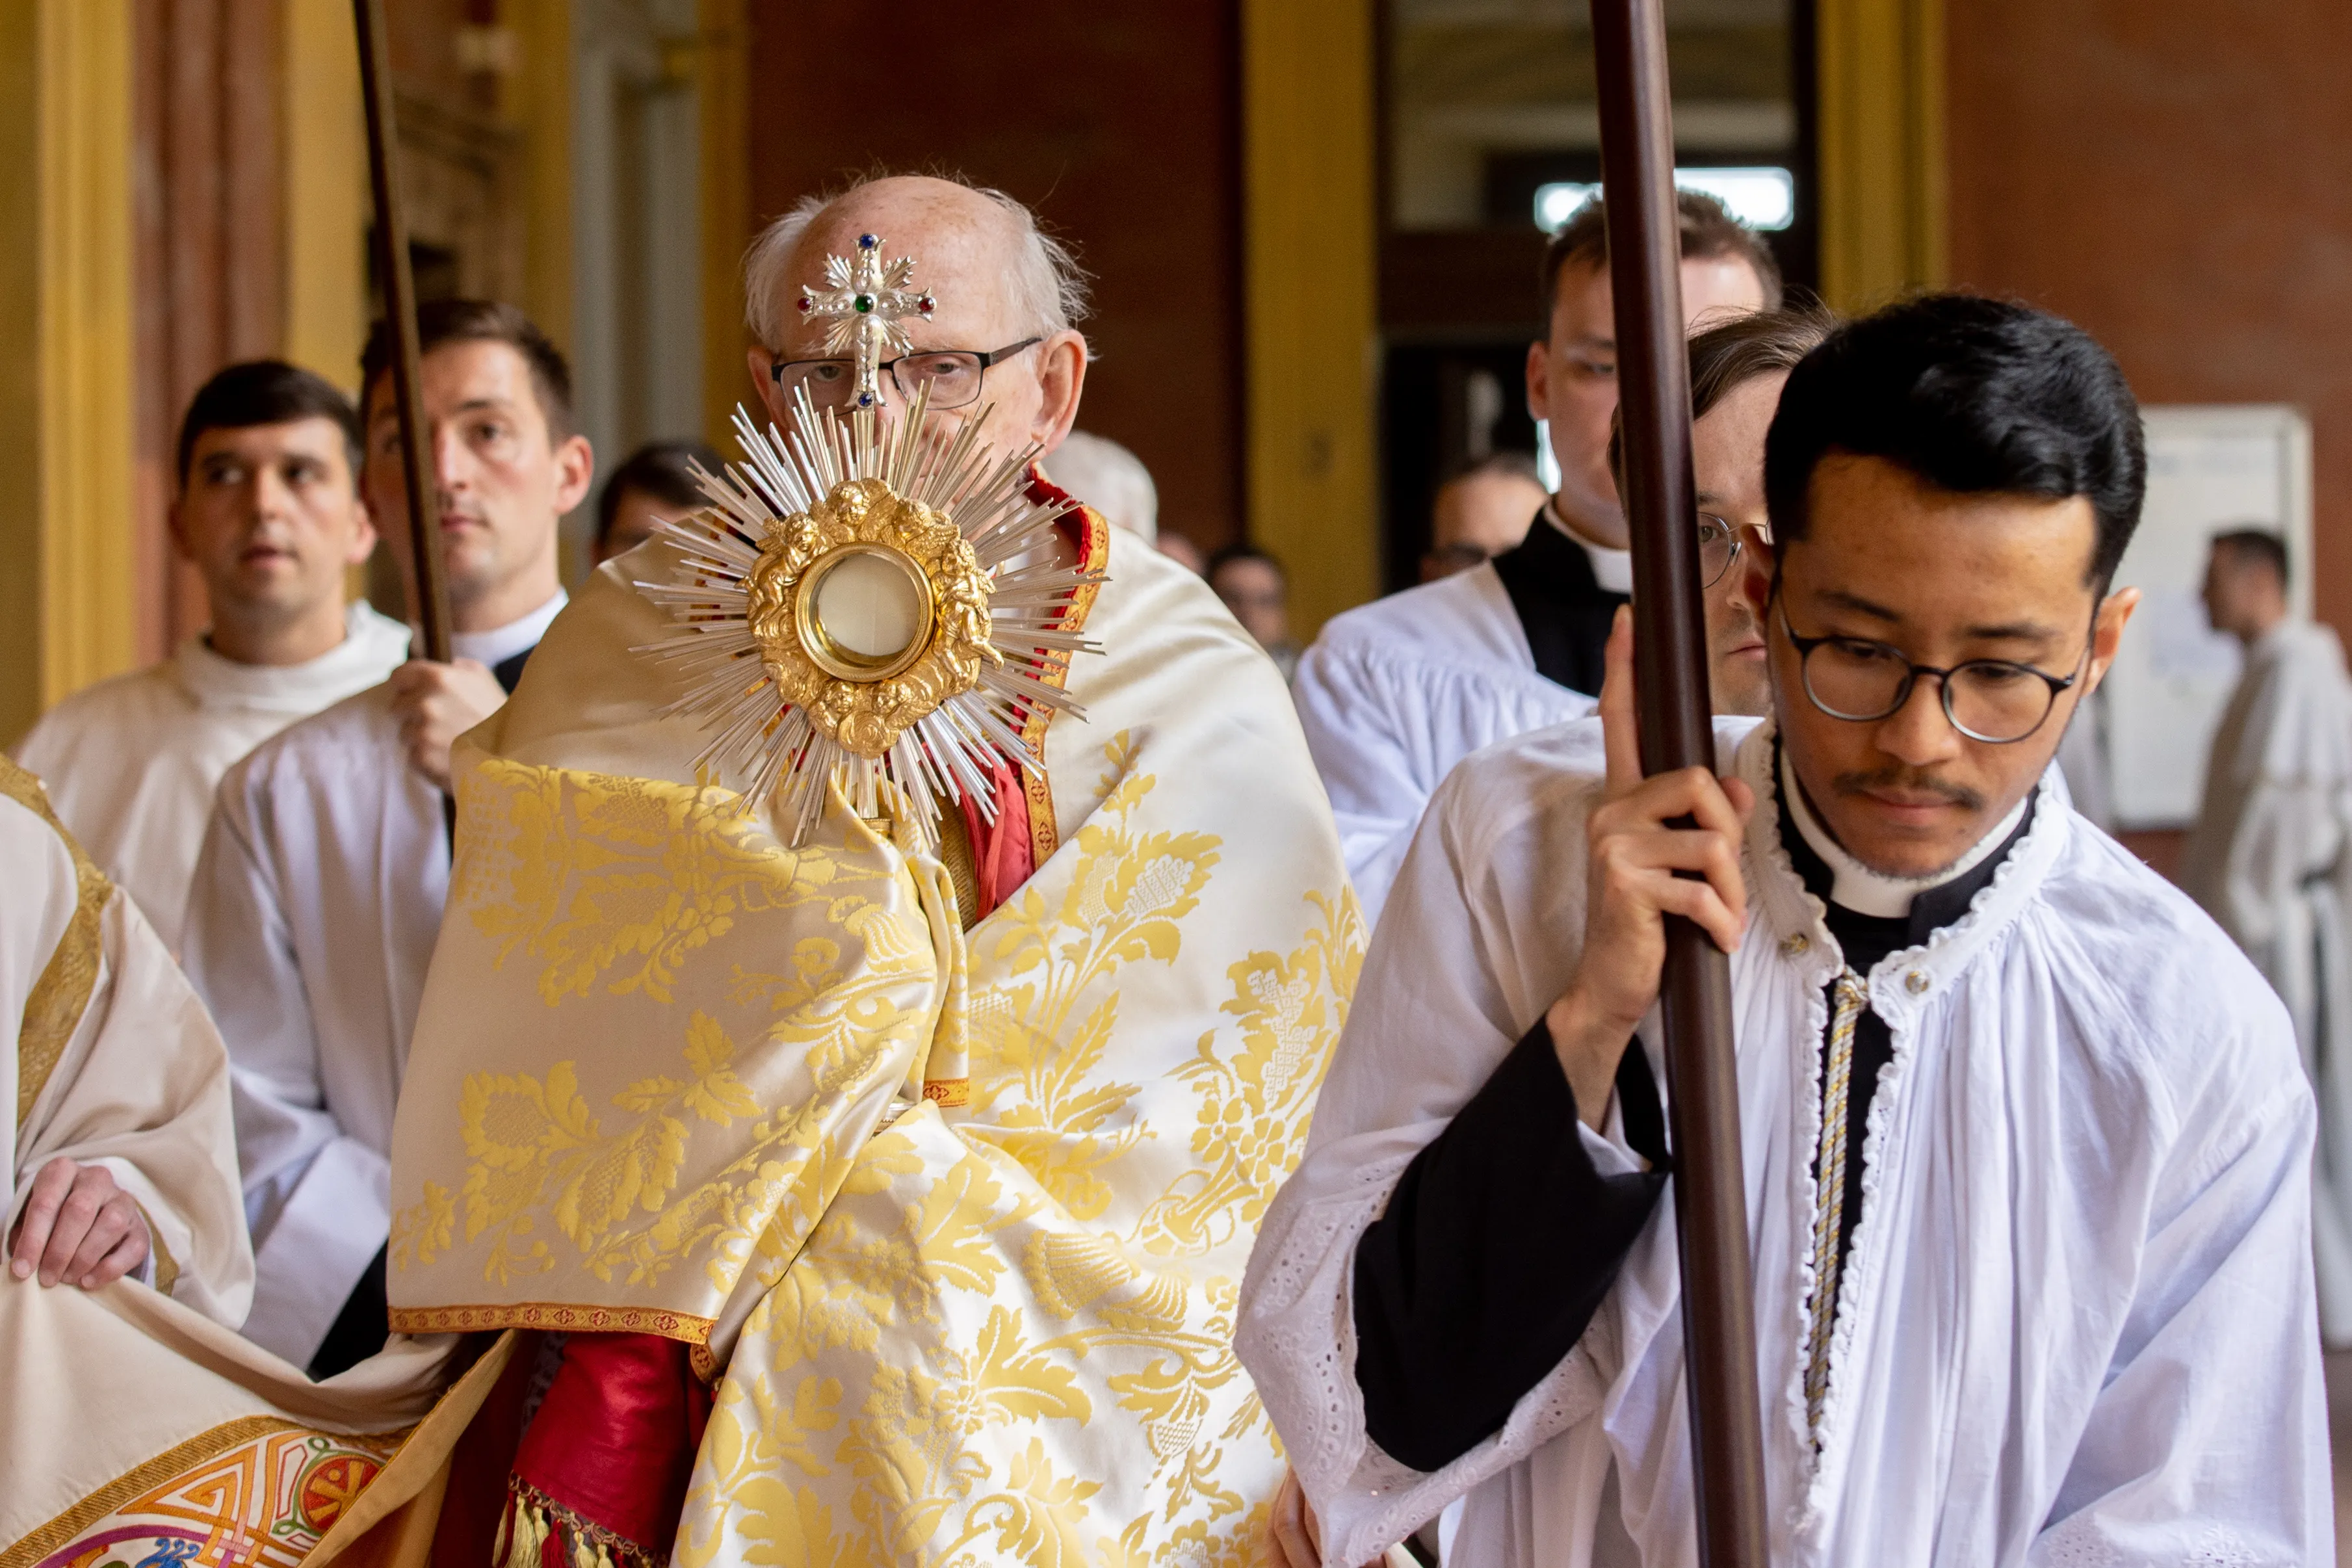 Cardinal James Michael Harvey presided over a eucharistic procession at the University of St. Thomas Aquinas, the Angelicum, in Rome on May 11, 2023. The 22nd edition of the annual procession was attended by about 130 students, faculty, and community members. Credit: Daniel Ibañez/CNA